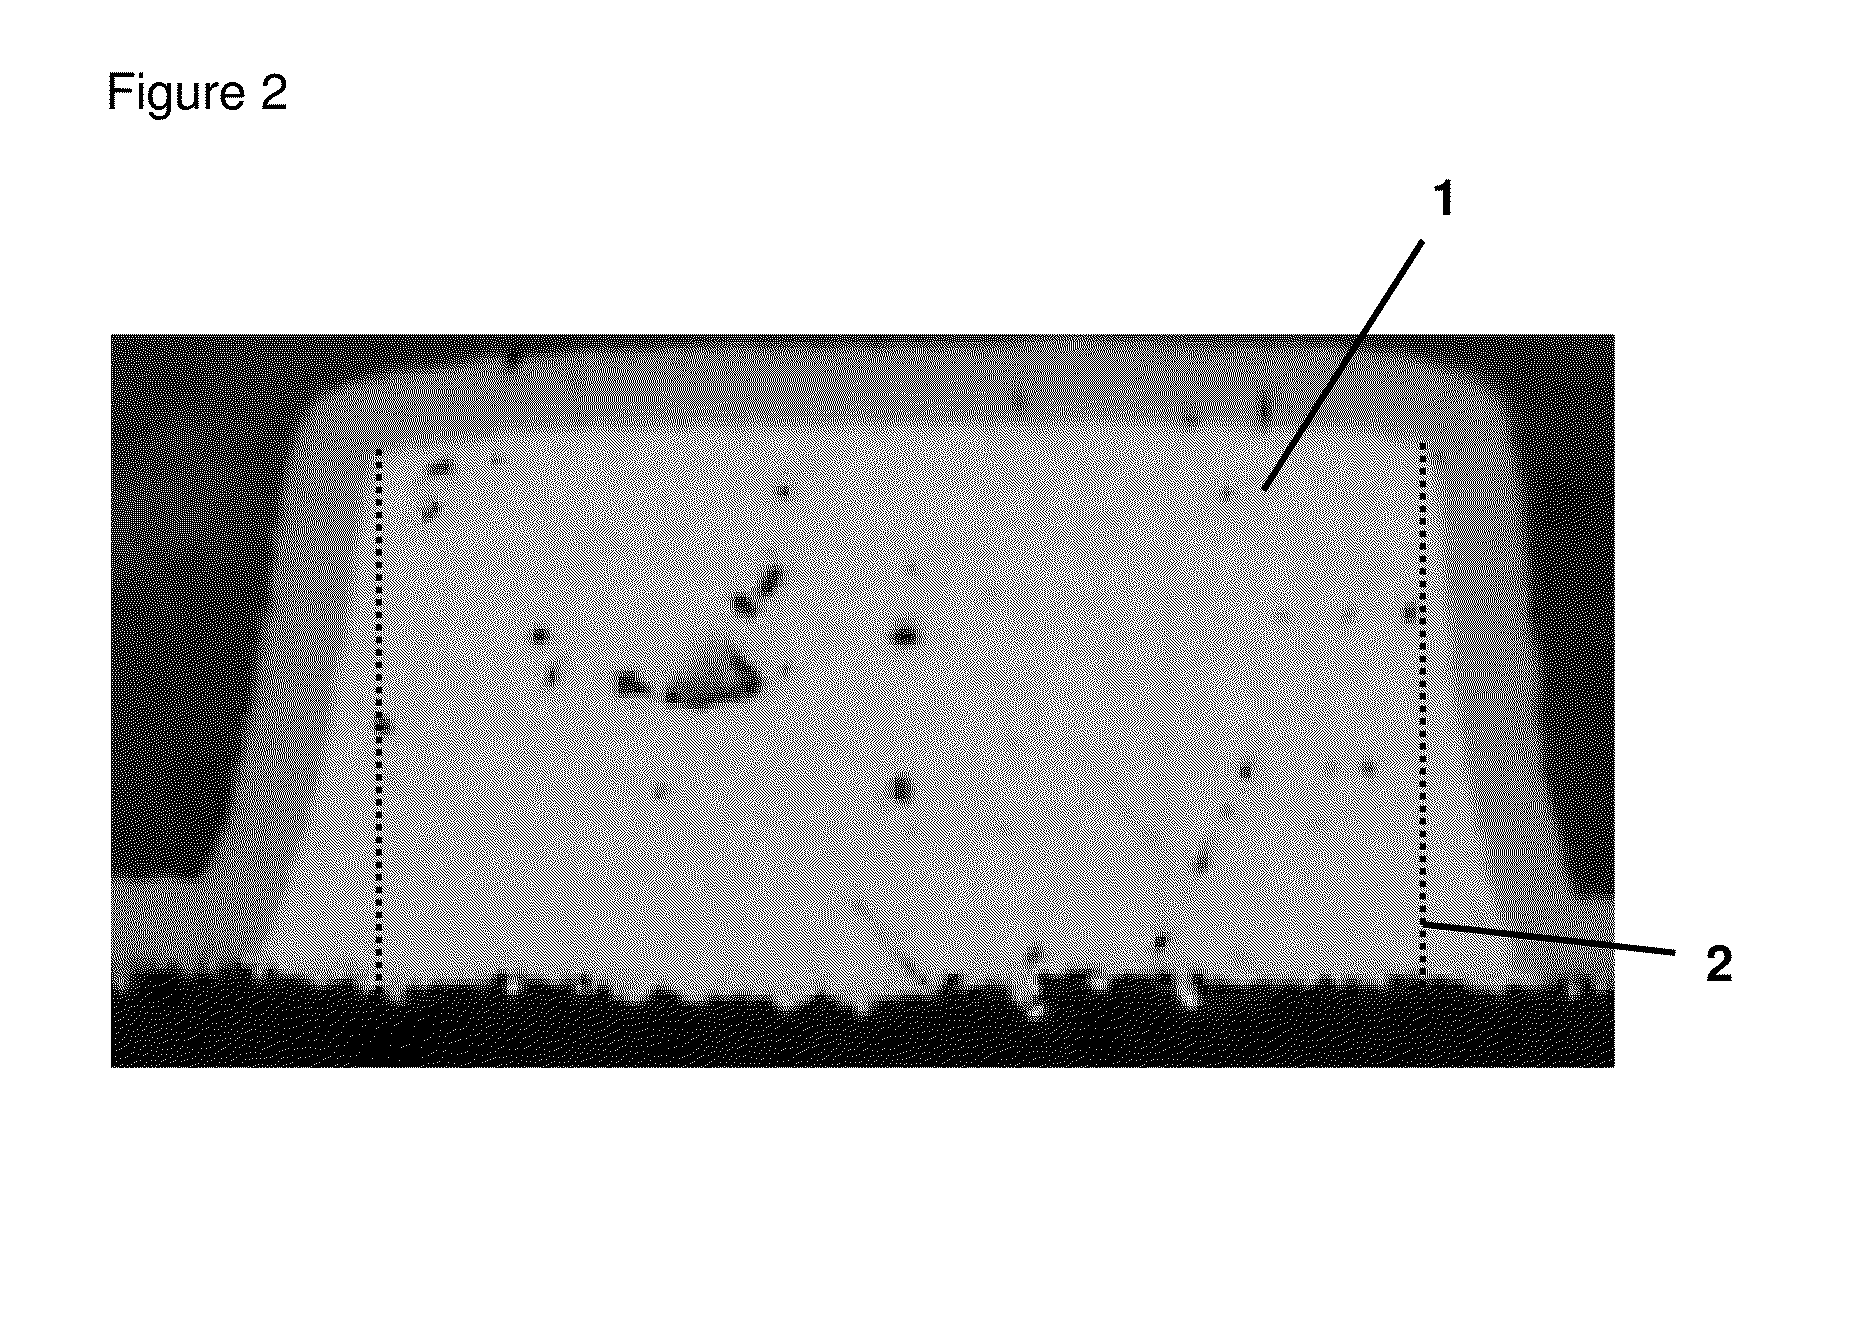 Aqueous composition for etching of copper and copper alloys